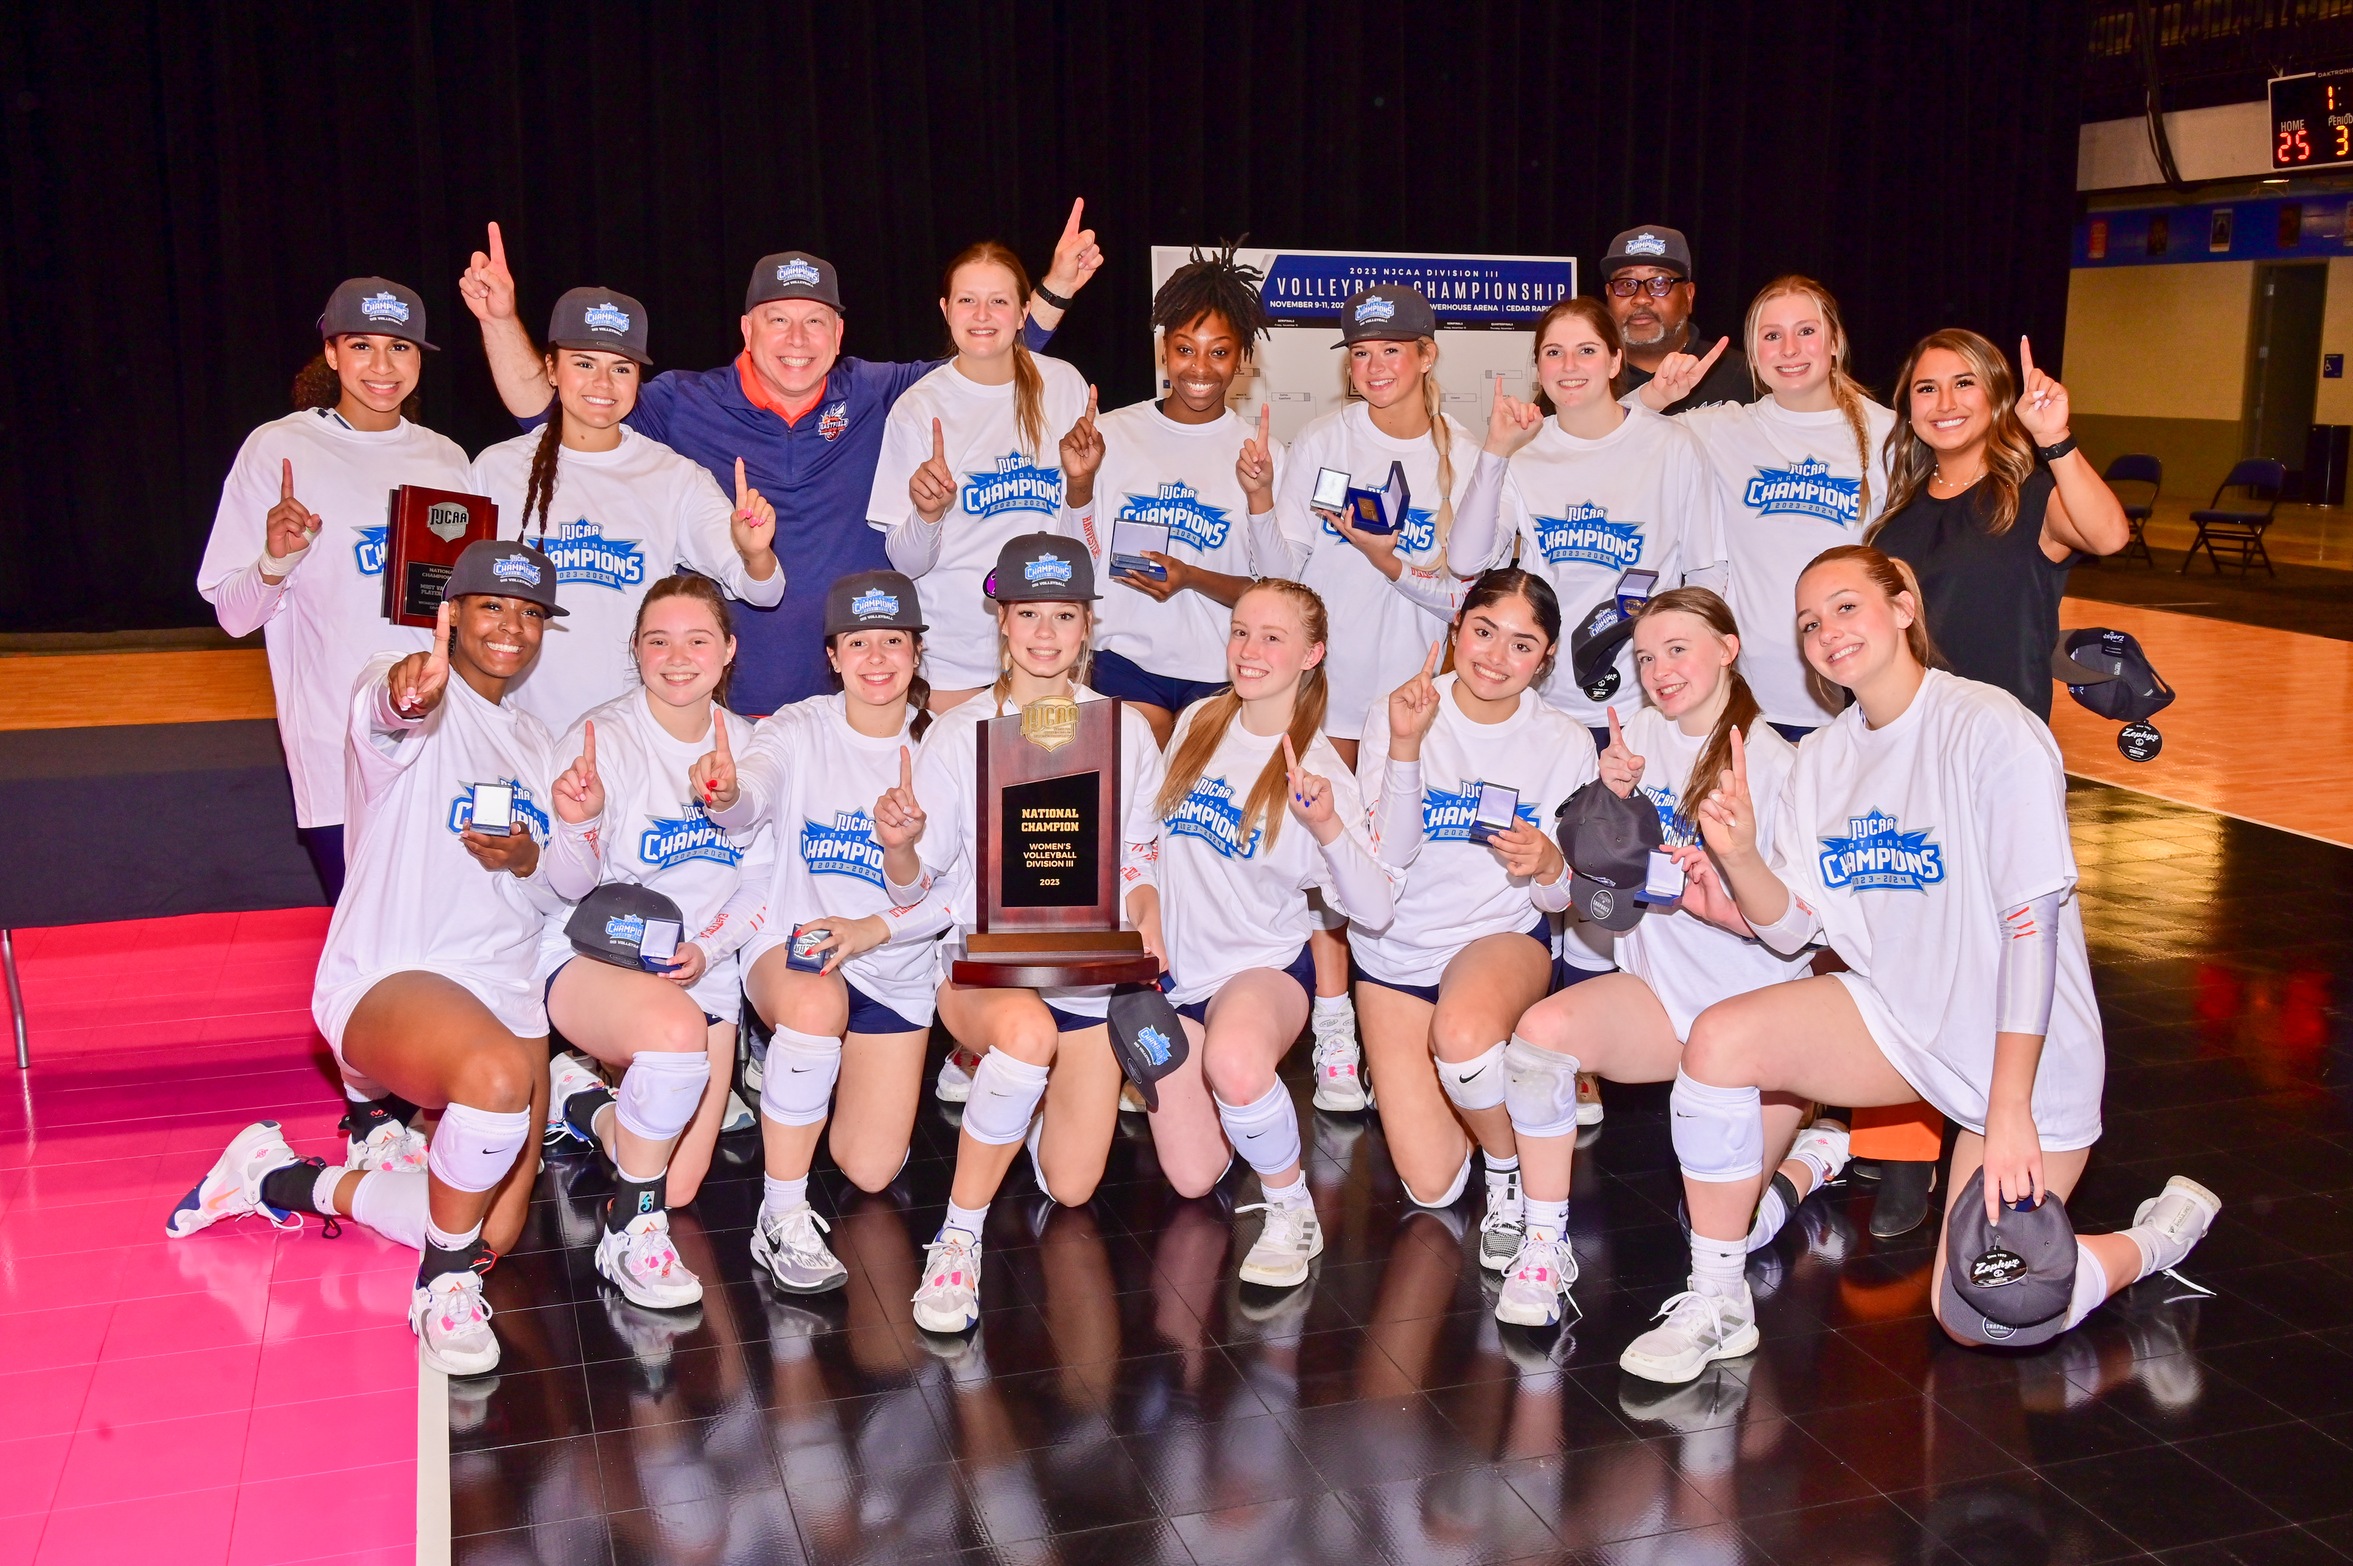 Volleyball to be Honored in National Championship Ceremony Feb. 24 at Richland